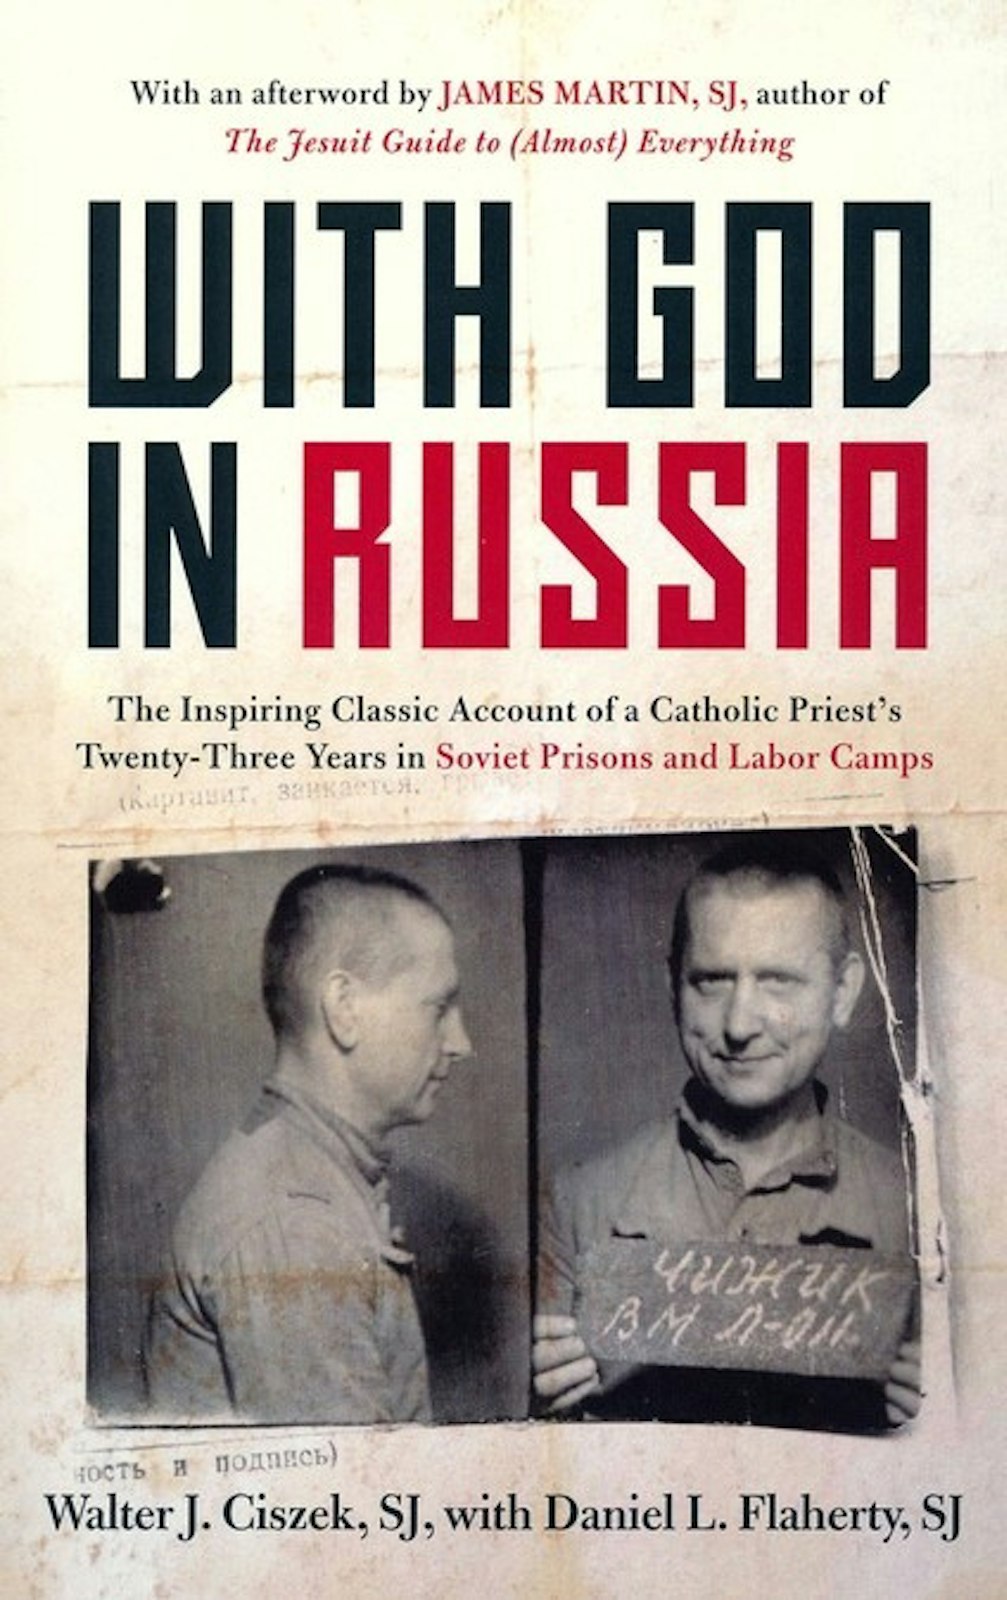 In 1964, upon his return to the United States, Fr. Ciszek wrote "With God in Russia," his memoirs of his time in the Russian work camps, at the direction of his Jesuit superiors.